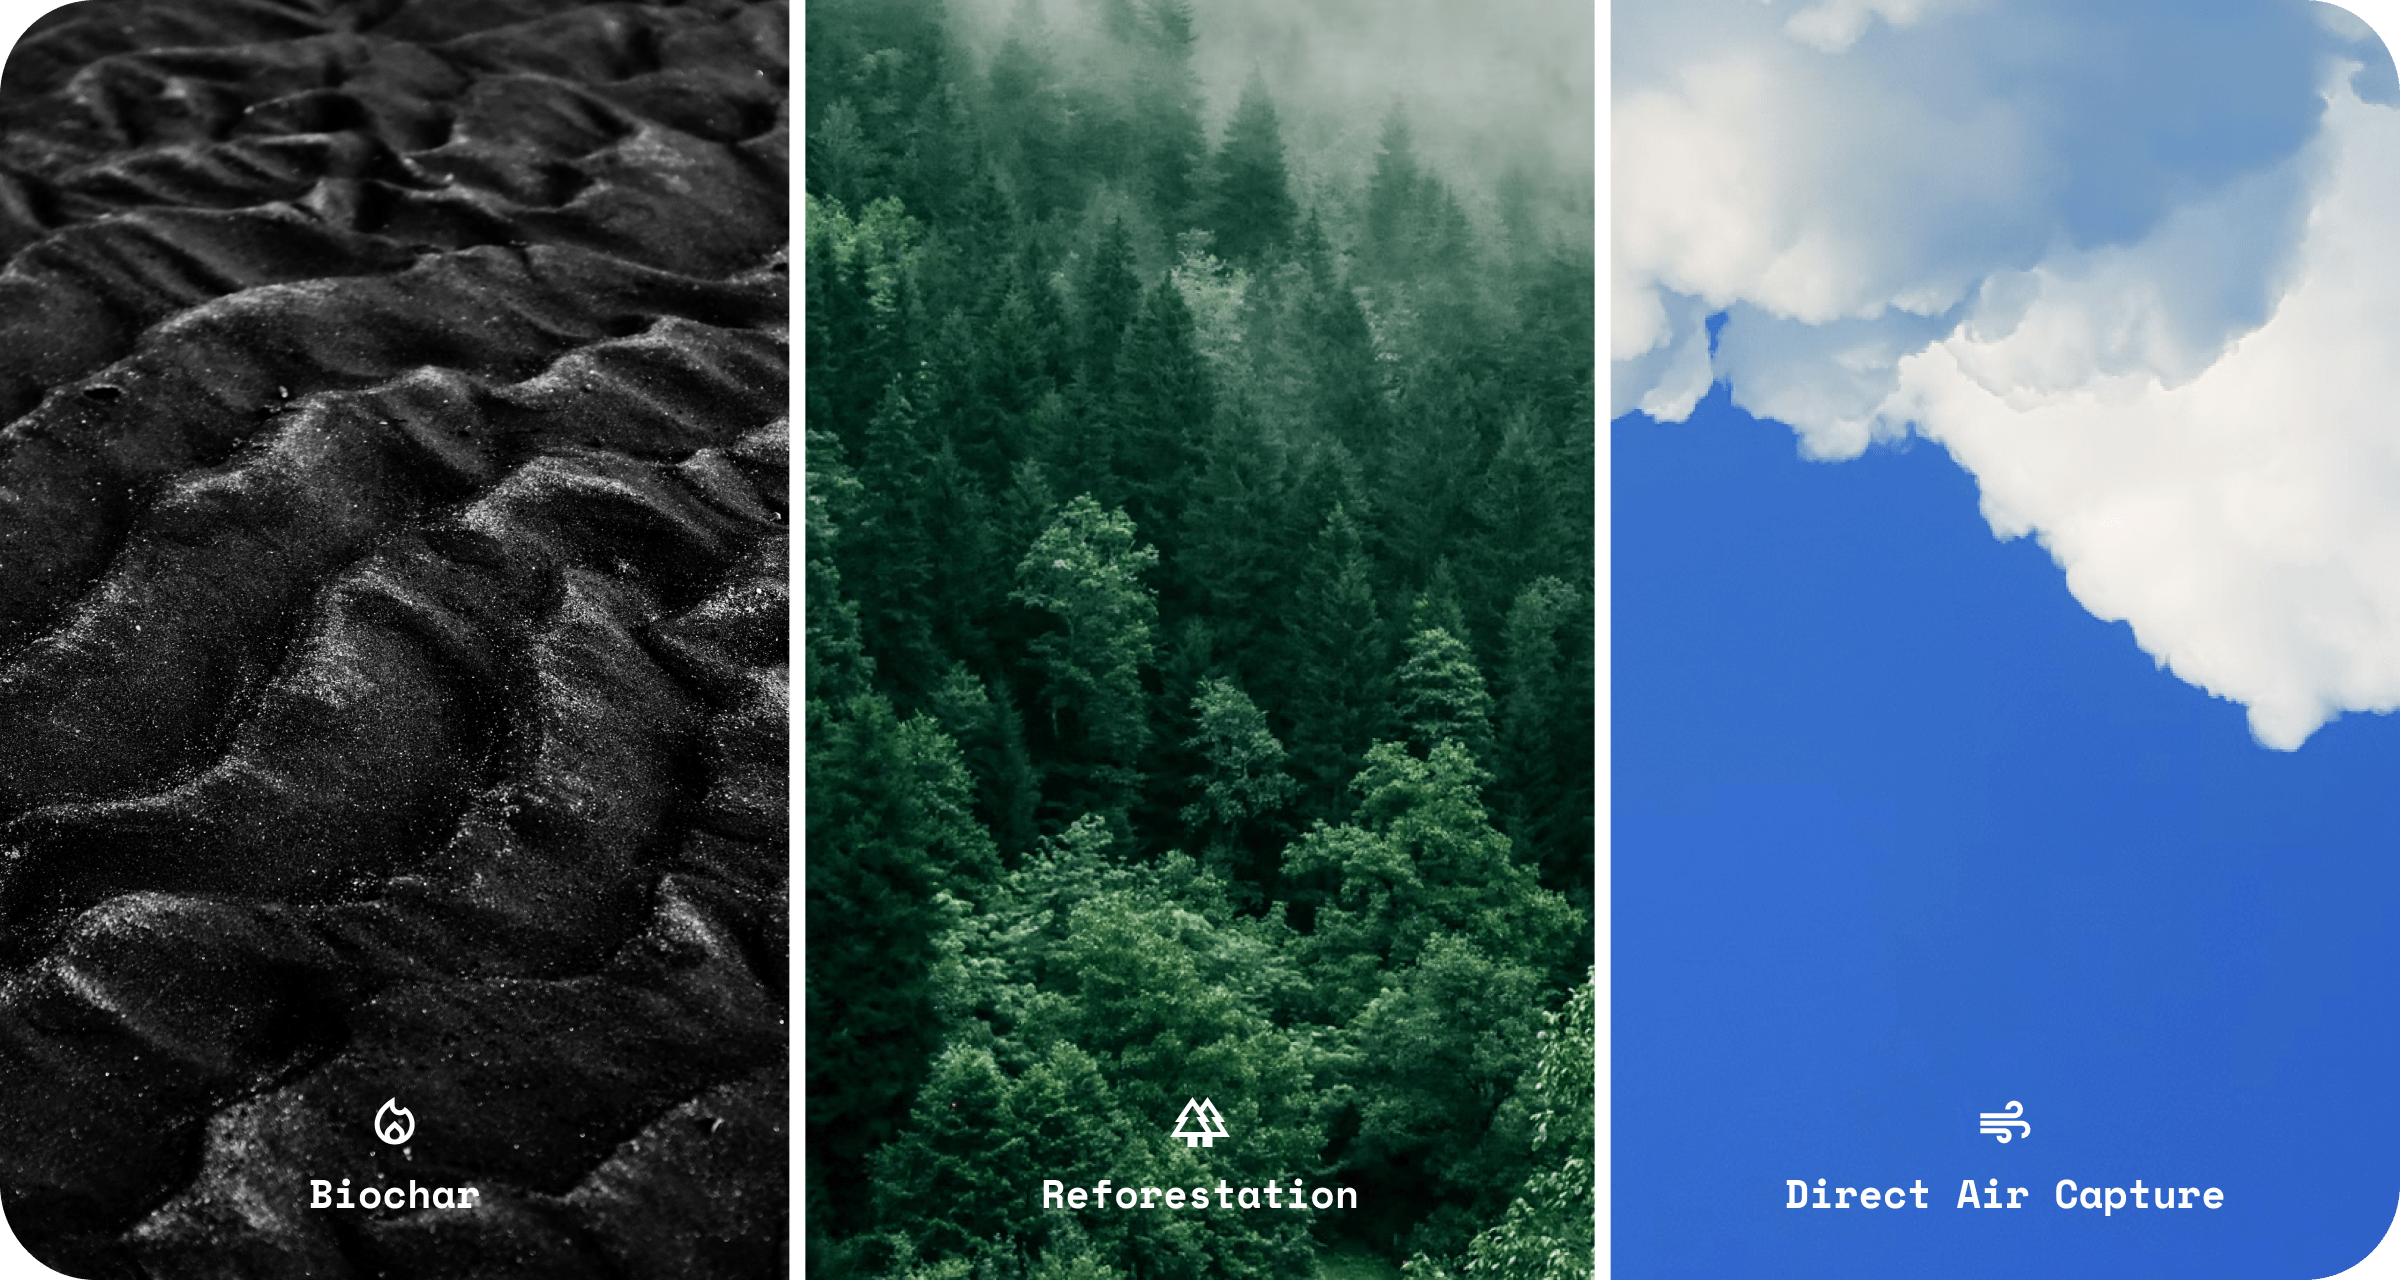 Three photos showing different carbon offset project types – biochar, reforestation, direct air capture